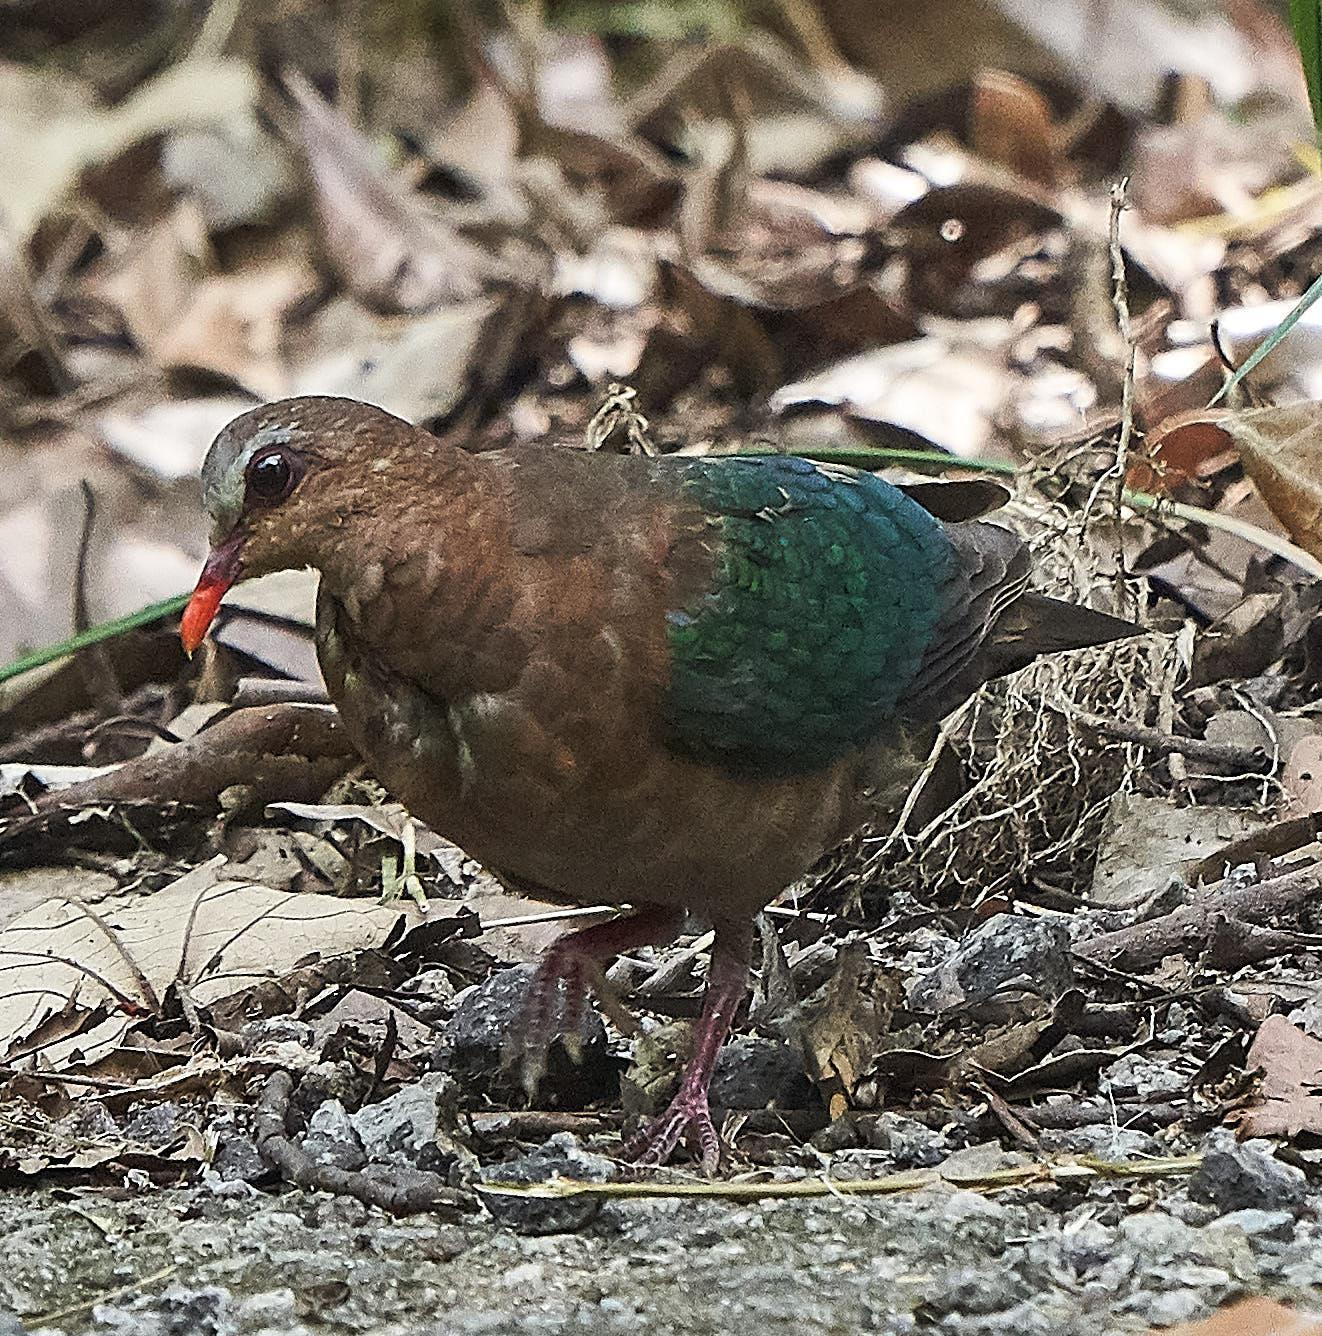 Asian Emerald Dove Photo by Steven Cheong